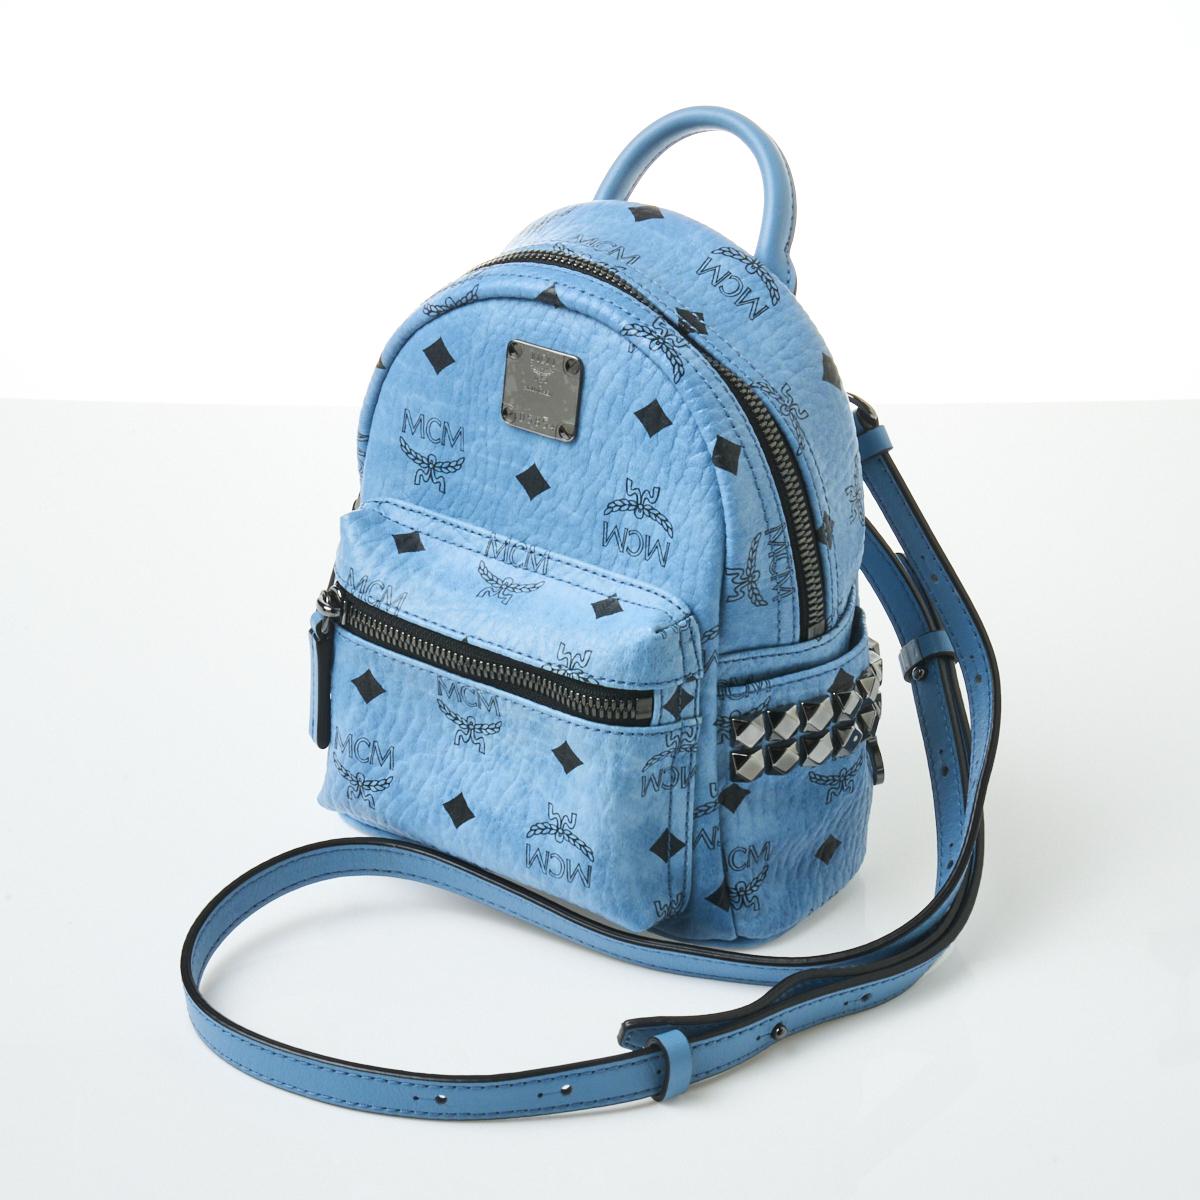 Sold at Auction: MCM Coated Canvas Backpack